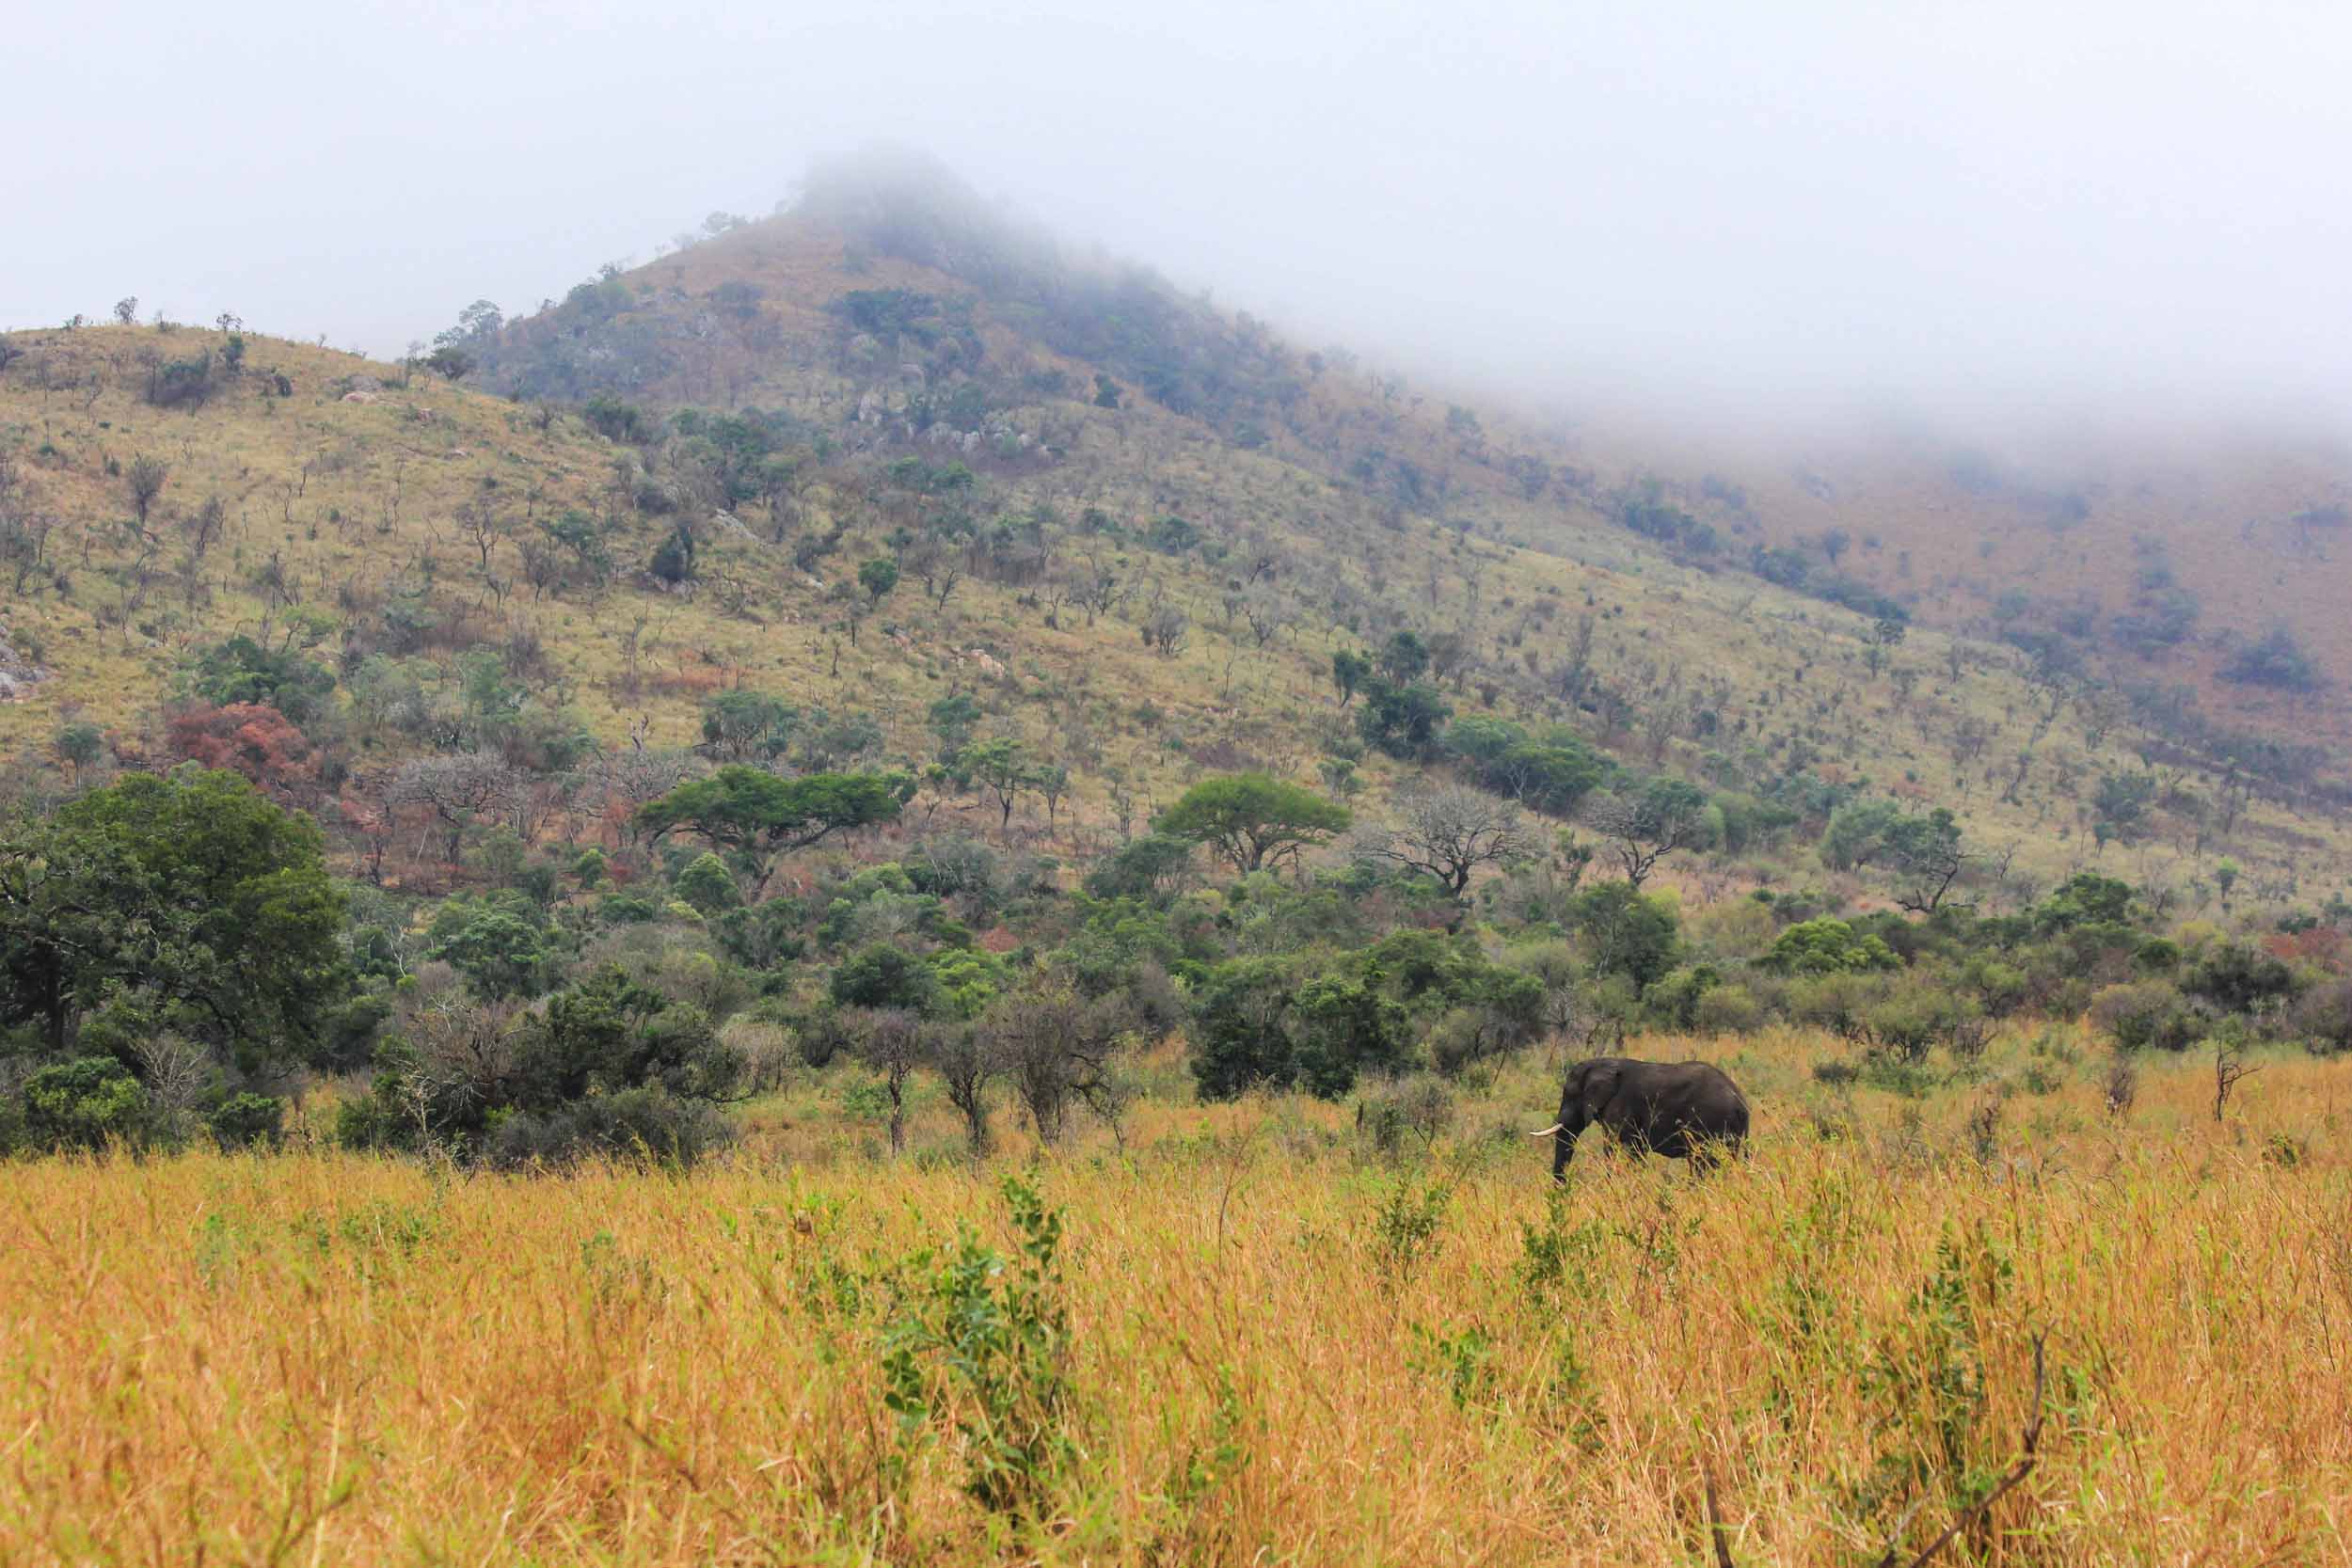 Elephant in the Morning Haze in Hluhluwe-iMfolozi Park, KwaZulu-Natal, South Africa. Copyright Angela Aliff. Creative Commons Attribution-NonCommercial 3.0 Unported (https://creativecommons.org/licenses/by-nc/3.0/).